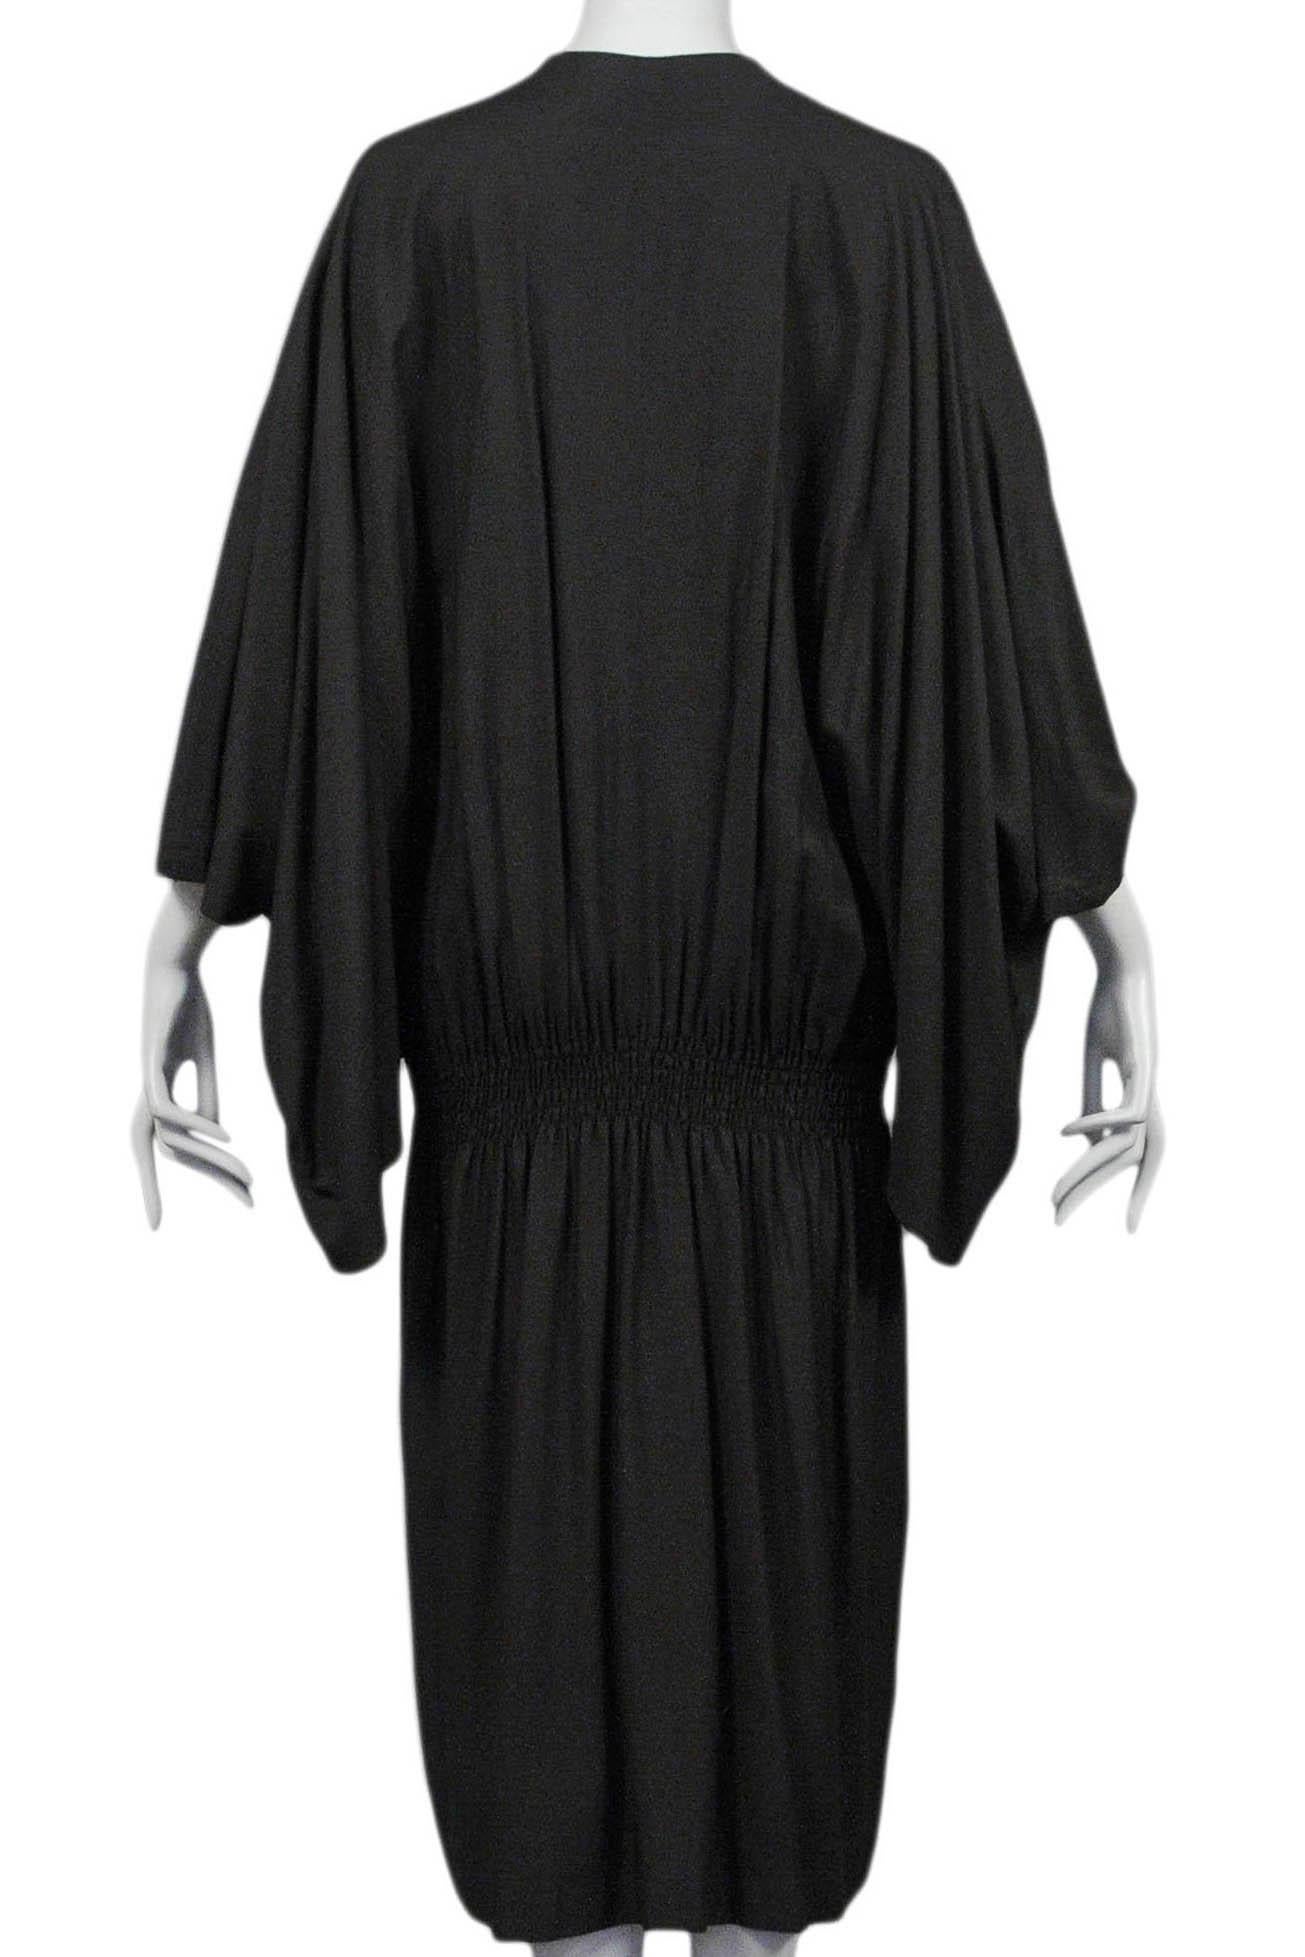 Comme Des Garcons Dark Brown Kimono Sleeve Dress With Elastic 1982 In Excellent Condition For Sale In Los Angeles, CA